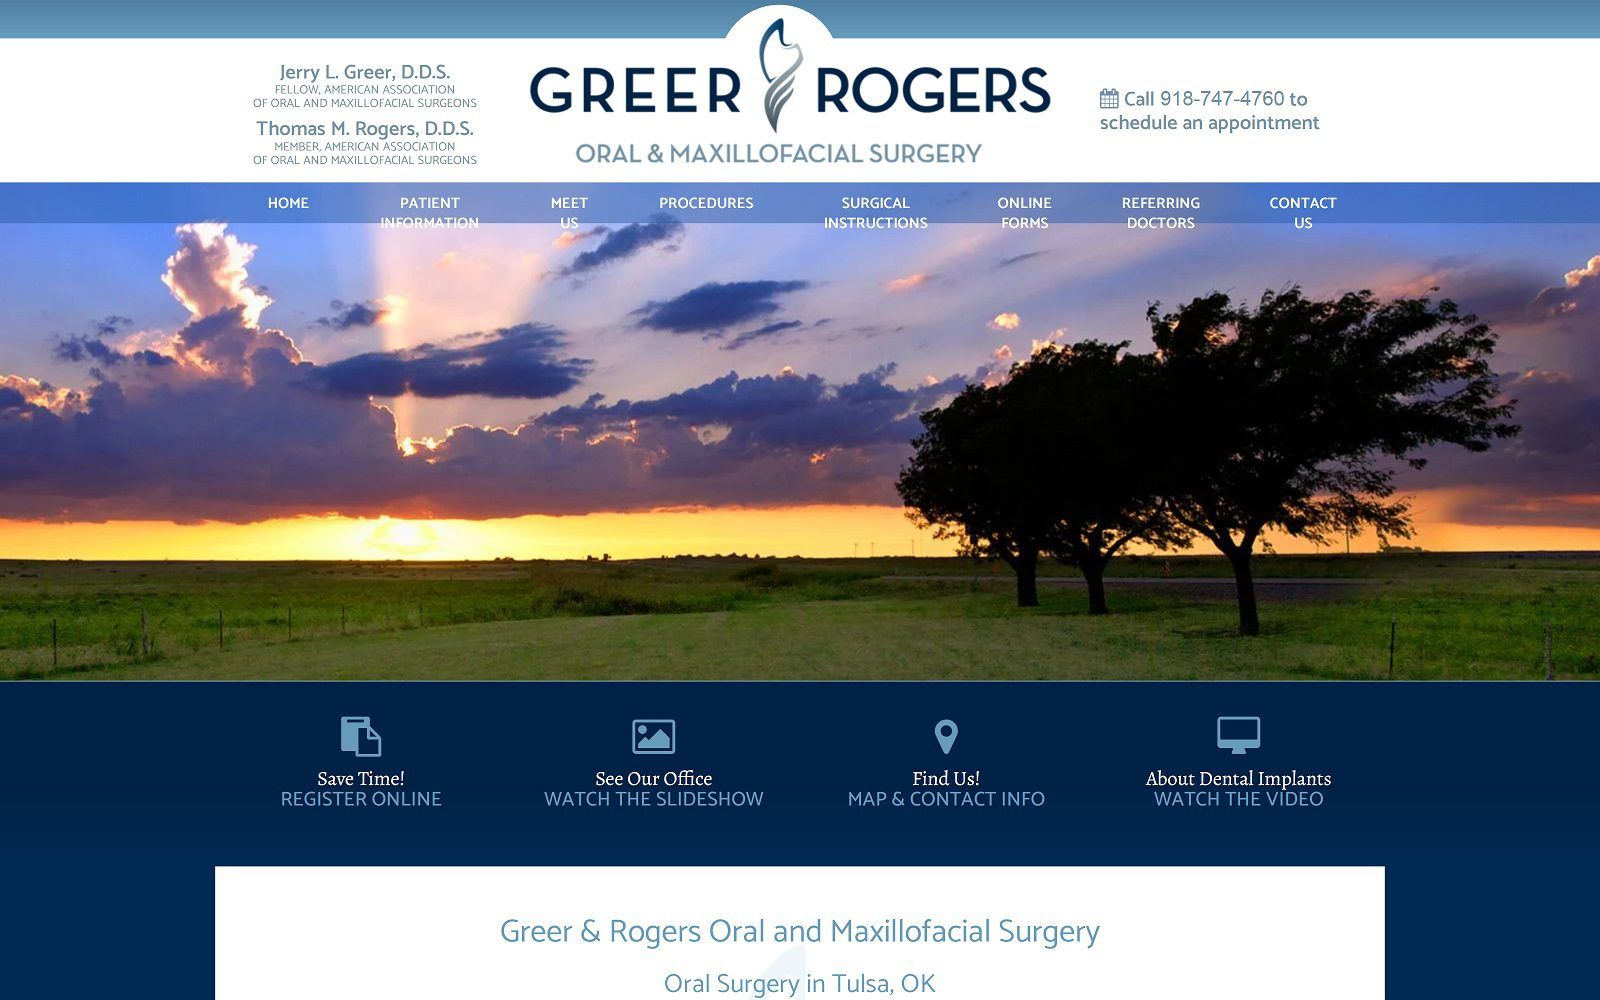 The screenshot of greer & rogers oral and maxillofacial surgery website